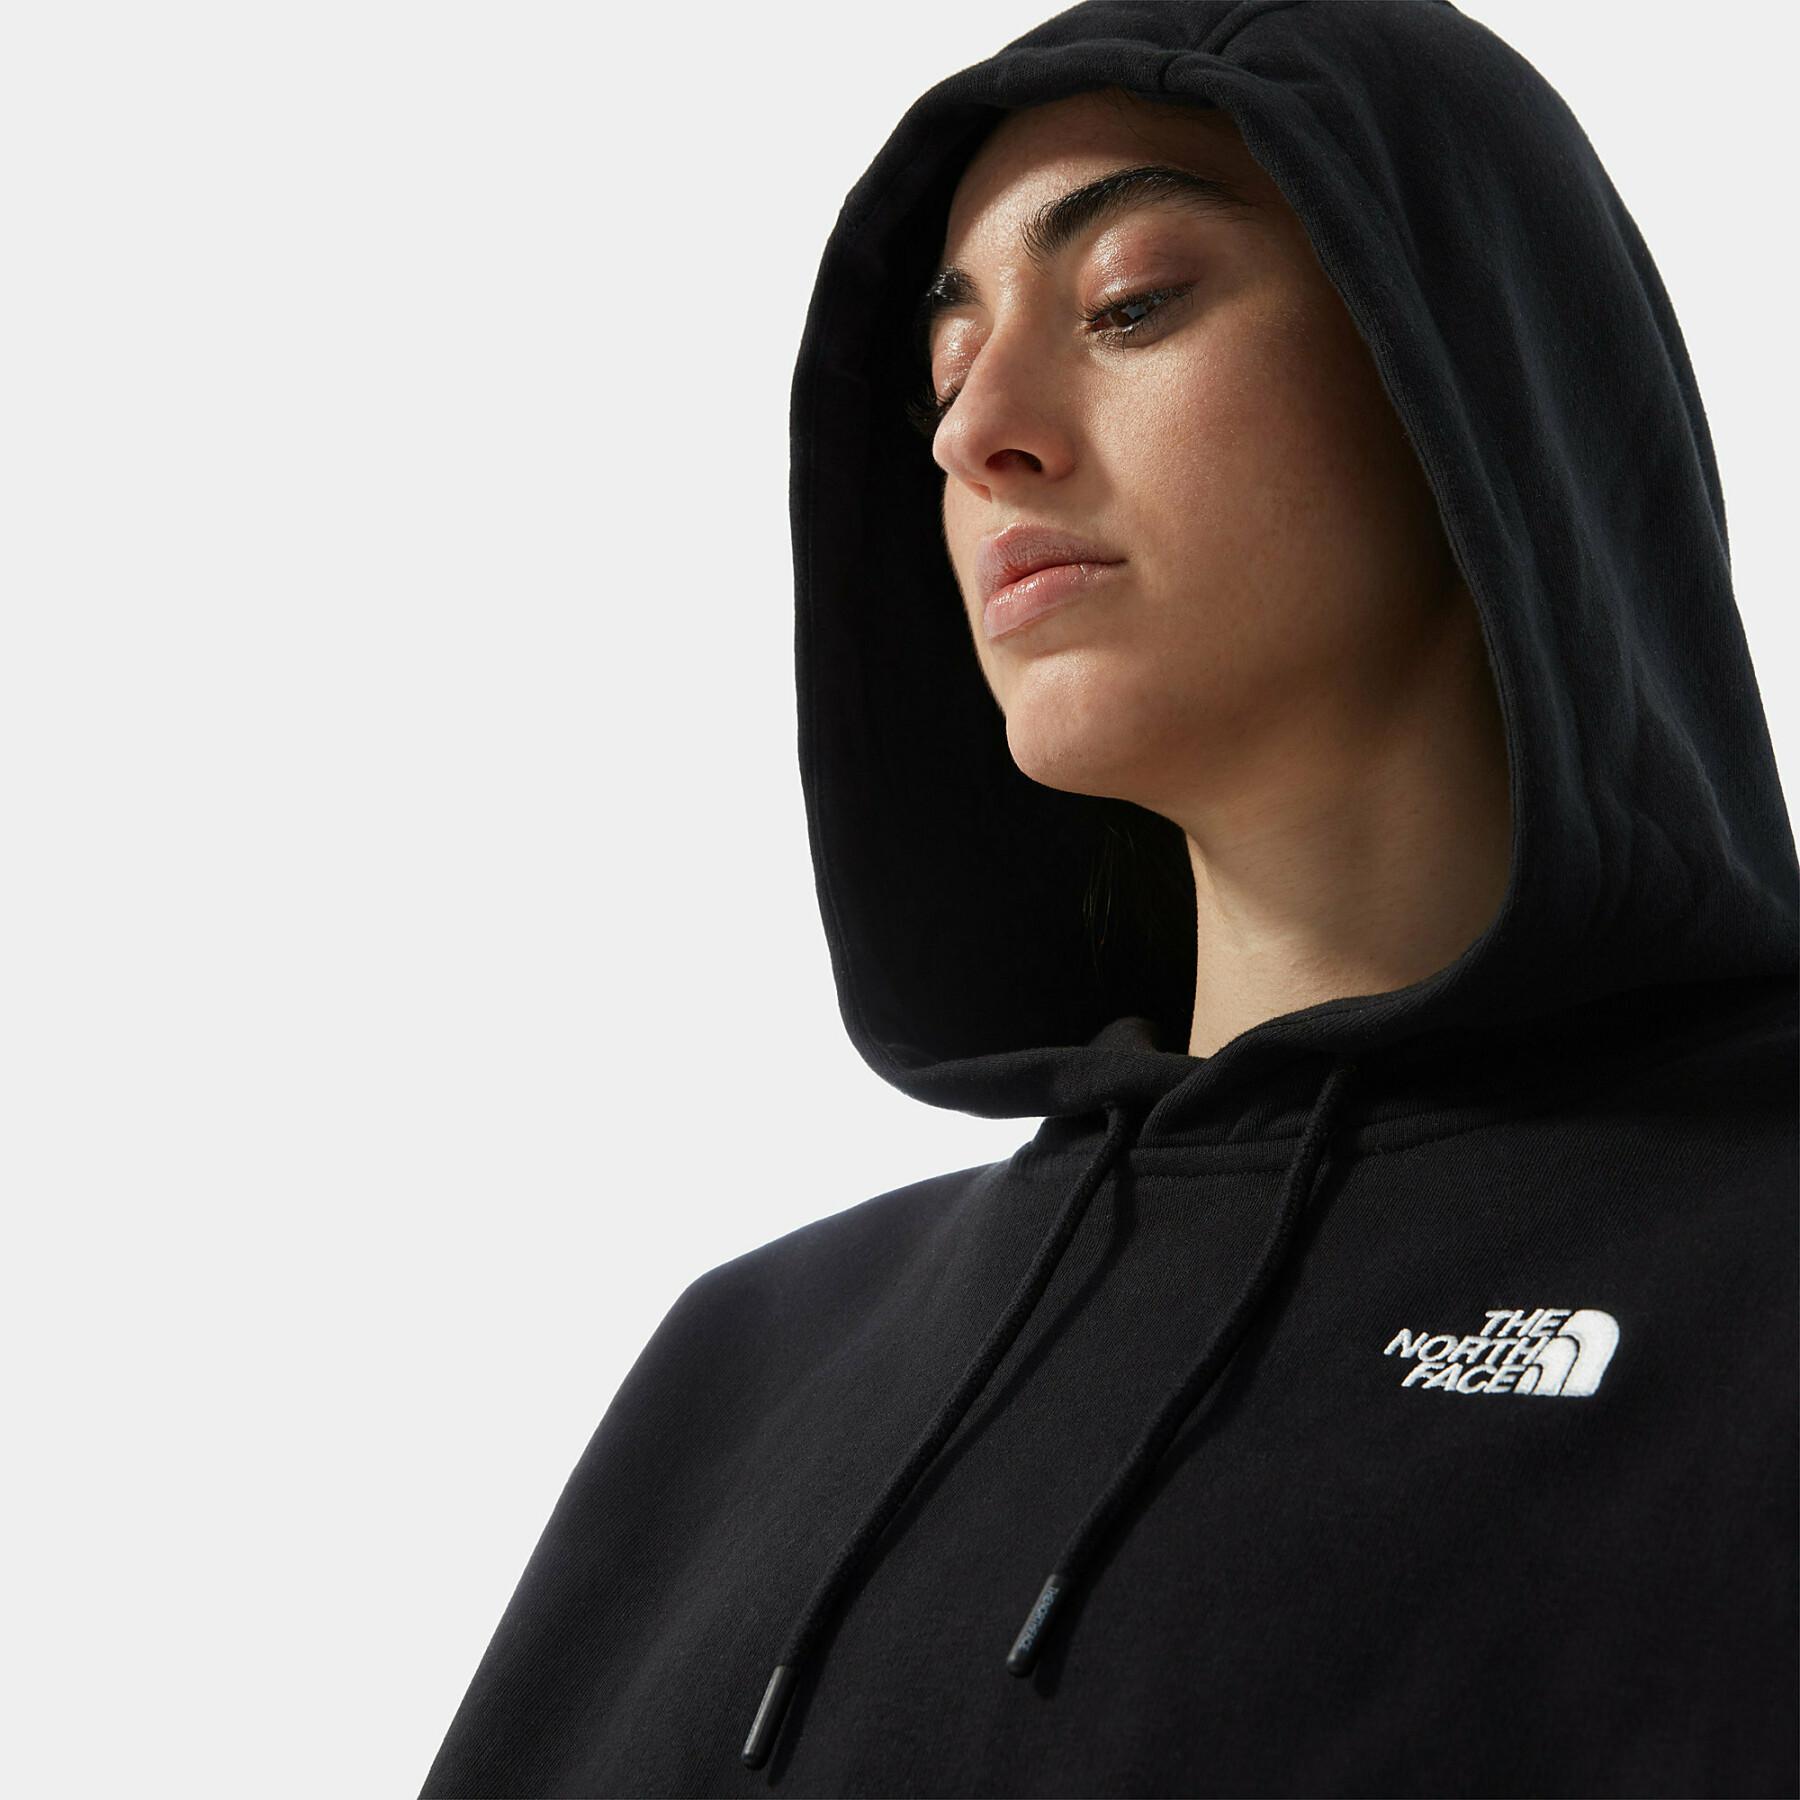 Women's hooded sweatshirt The North Face Oversized Essential